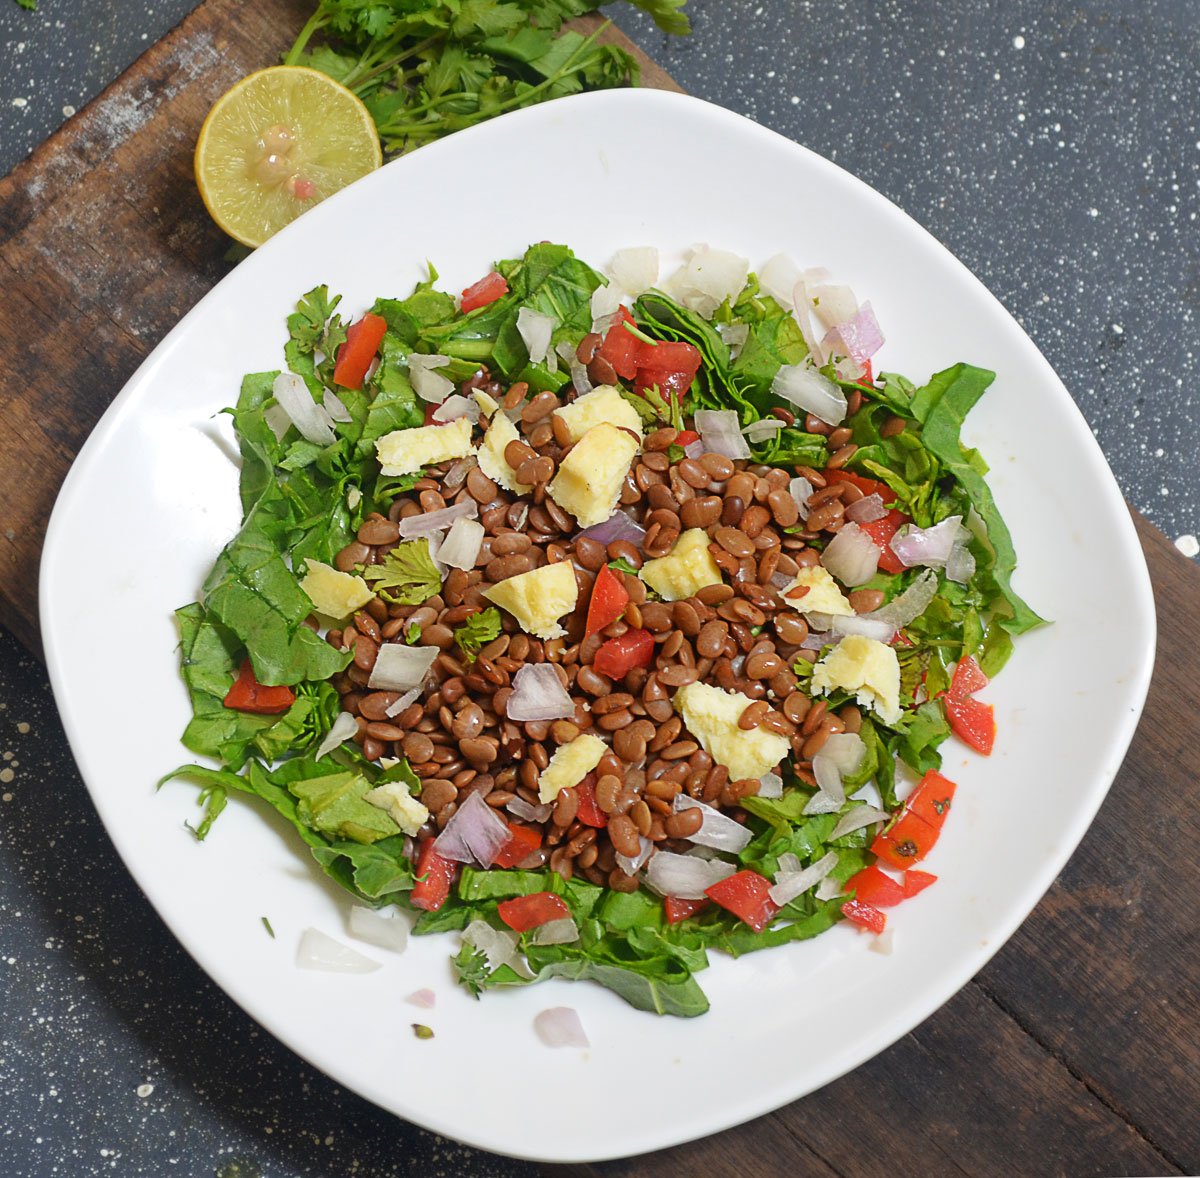 Warm Red Lentil Salad With Goat Cheese Recipe